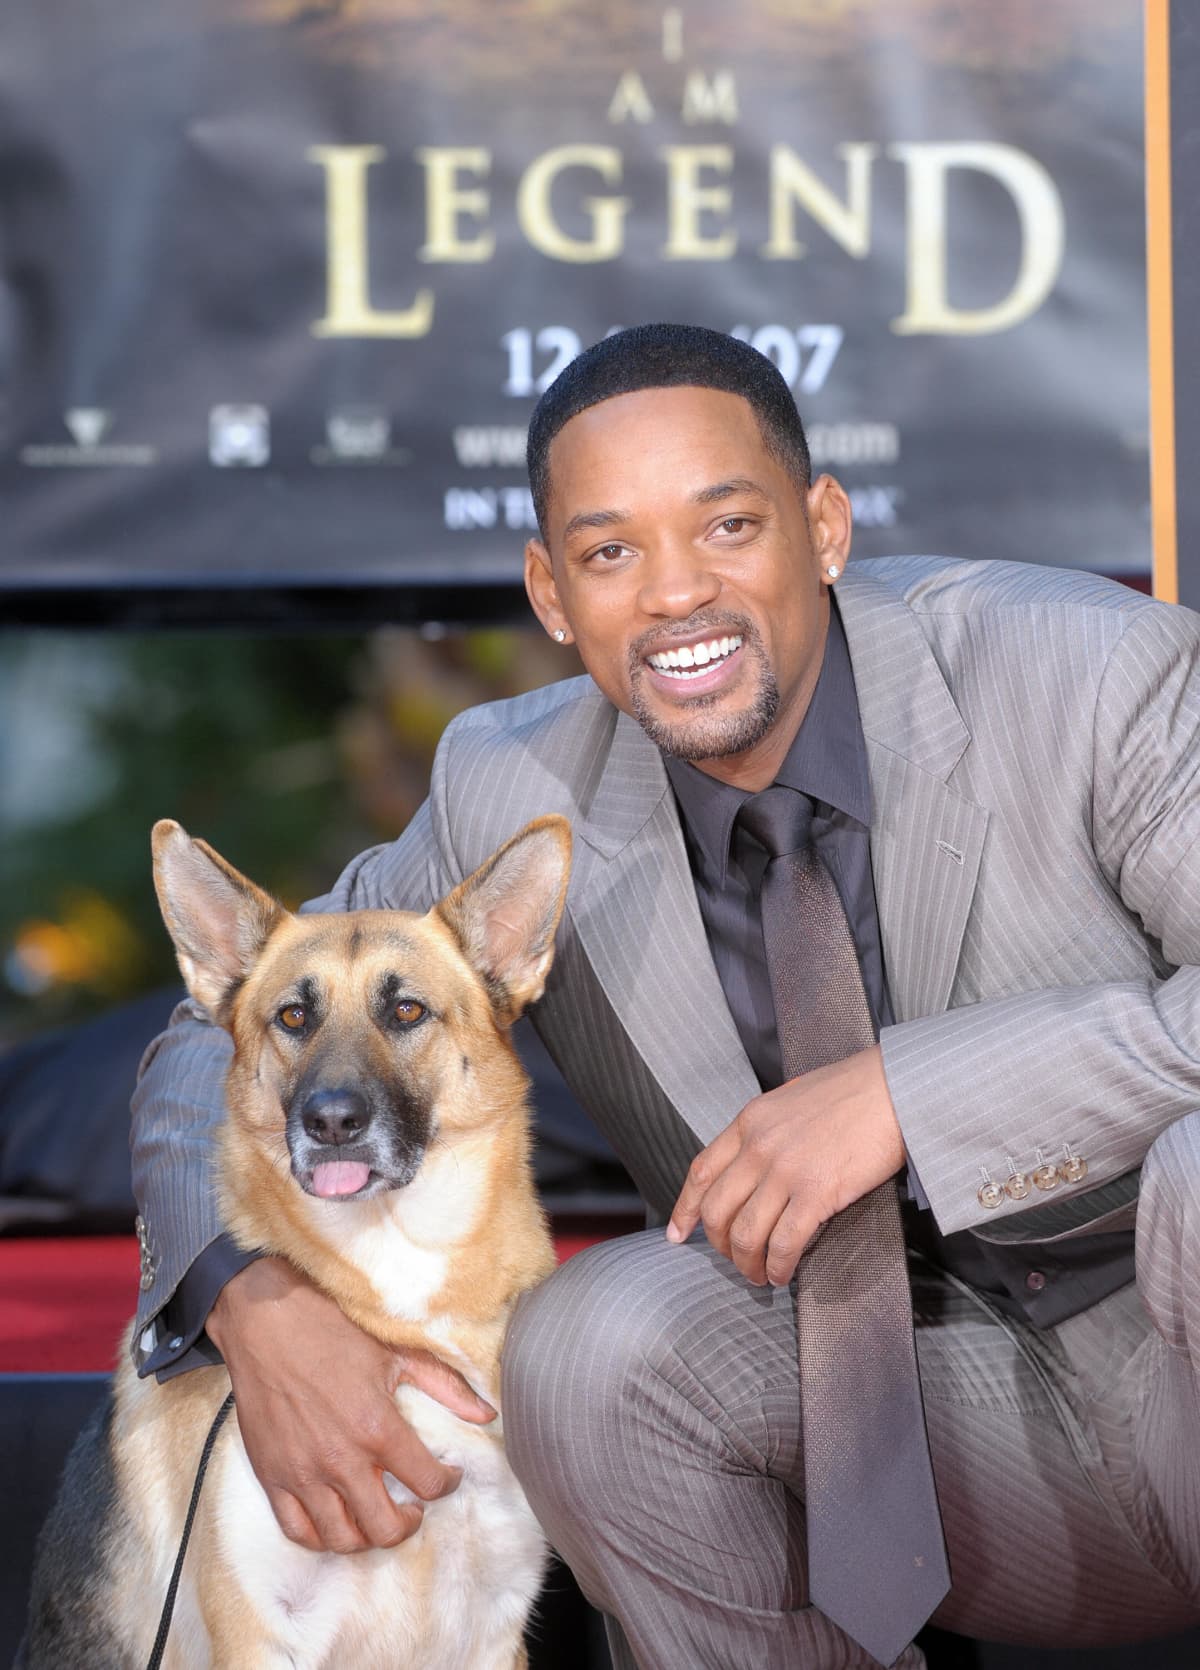 American film actor Will Smith attends a gala premiere to promote the new movie "I Am Legend" at Times Square, Hong Kong, 07 December 2007. The film will be on general release from 13 December in Hong Kong.  AFP PHOTO/Andrew ROSS (Photo credit should read ANDREW ROSS/AFP via Getty Images)